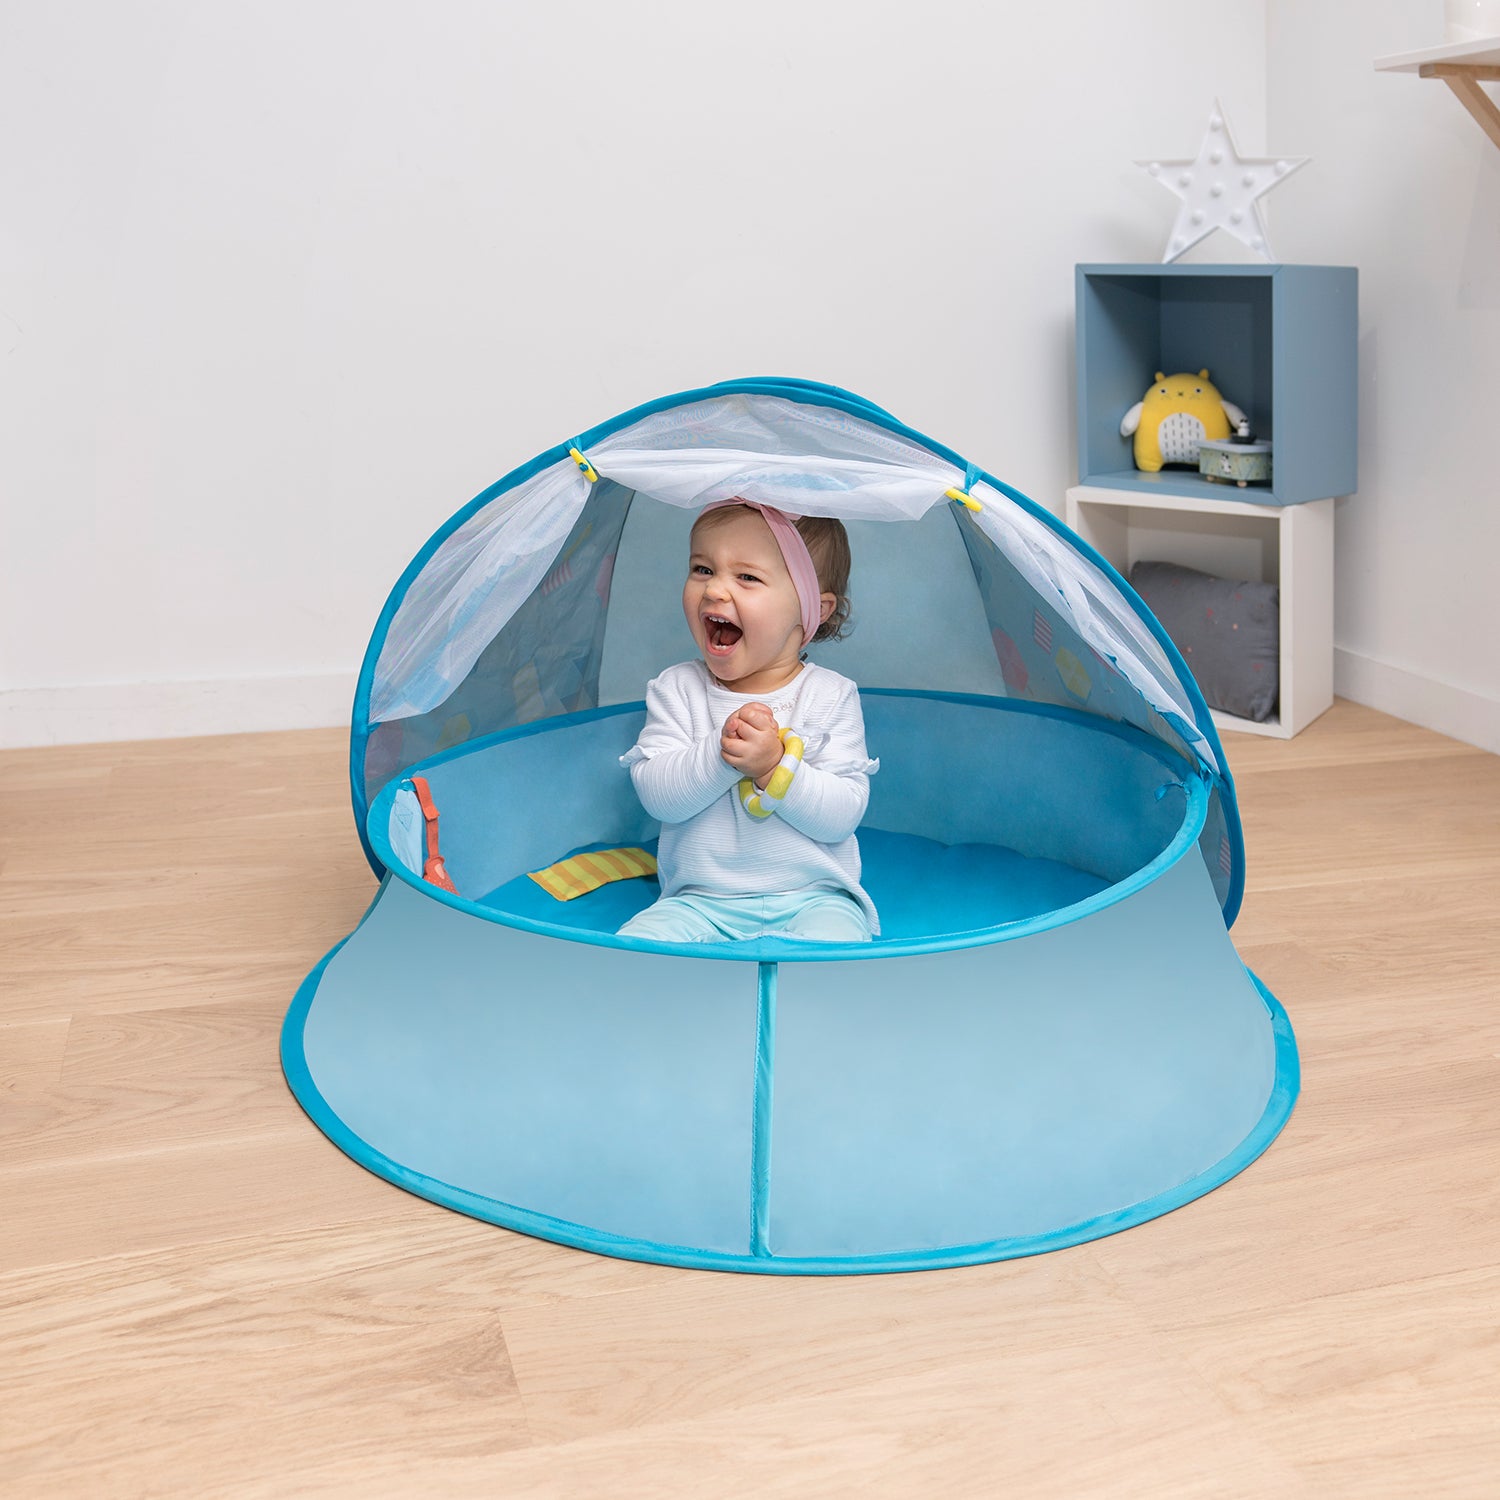 Pop up Anti uv beach tent for babies infants and toddlers. Mosquito proof pop up tent. Pool pop up tent. Tent with pool. Pool can be turned into ball pit tent. Sun shelter for babies with pool. Fill water in the tent to turn it into a pool tent. Kiddie pool. Blue design in kiddie pool. Baby pool.